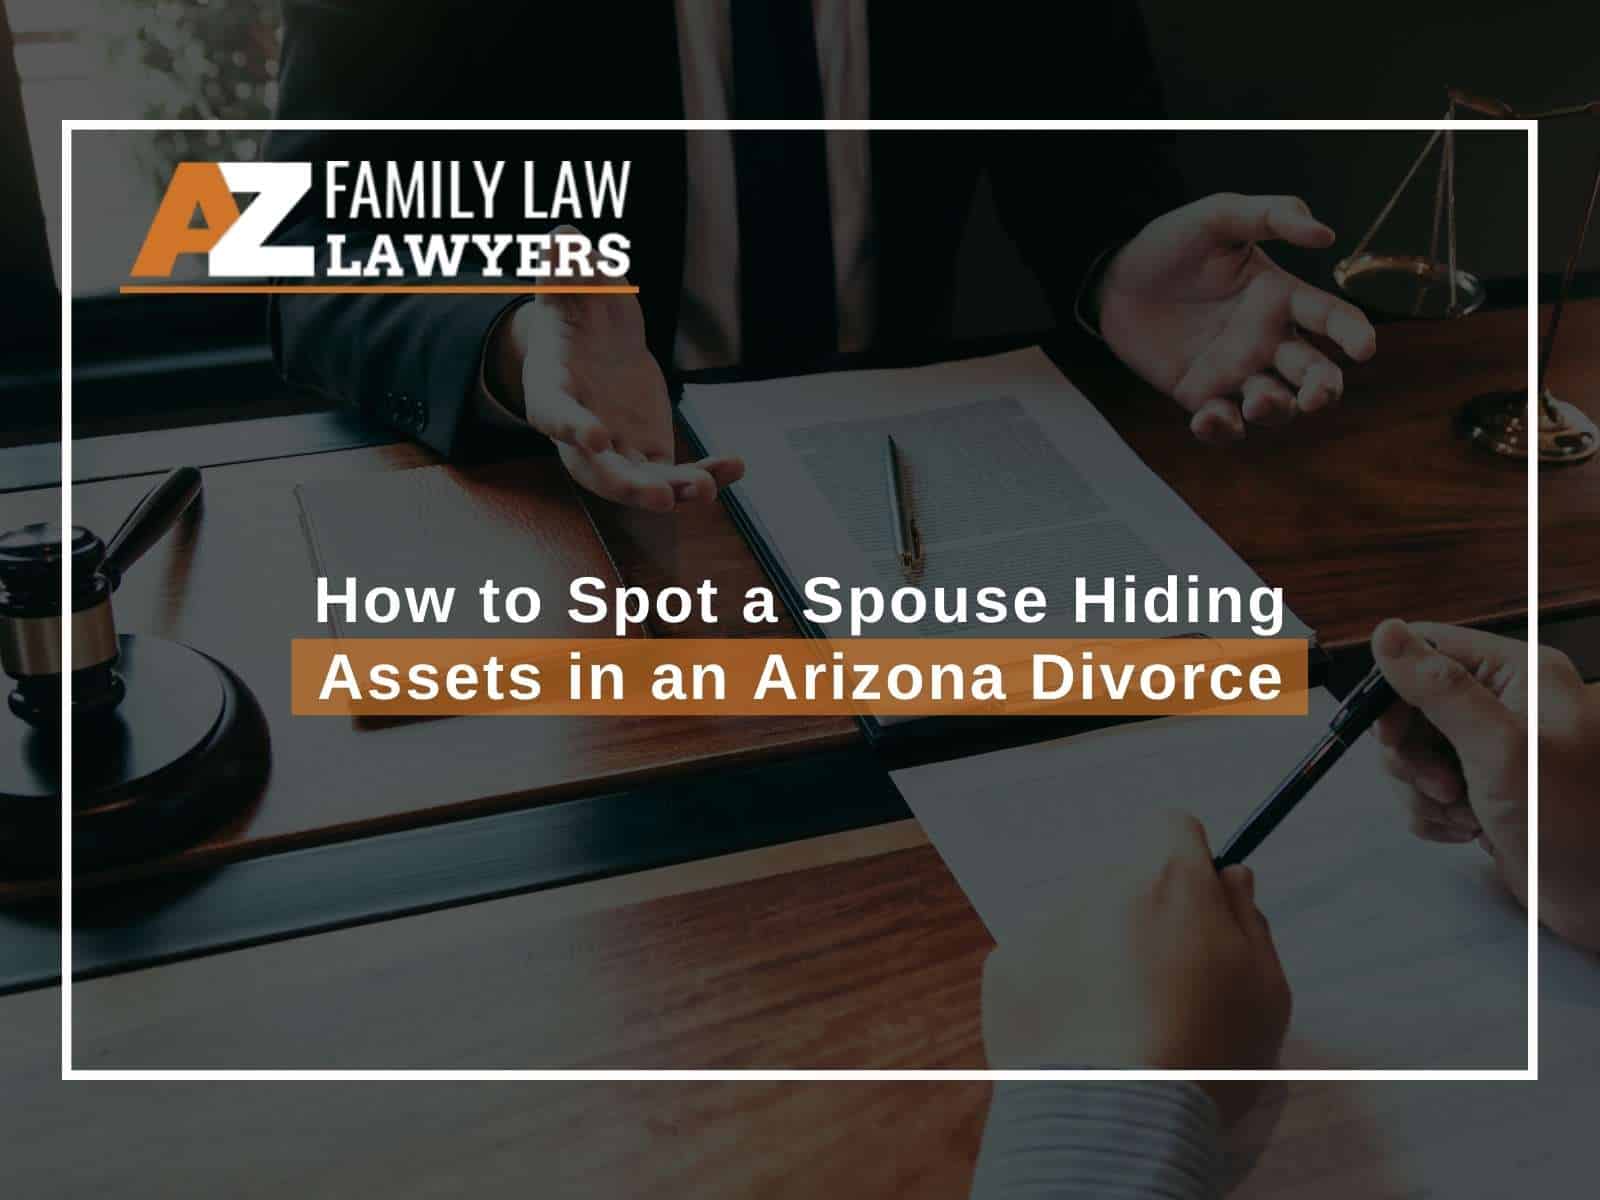 How to Spot a Spouse Hiding Assets in an Arizona Divorce